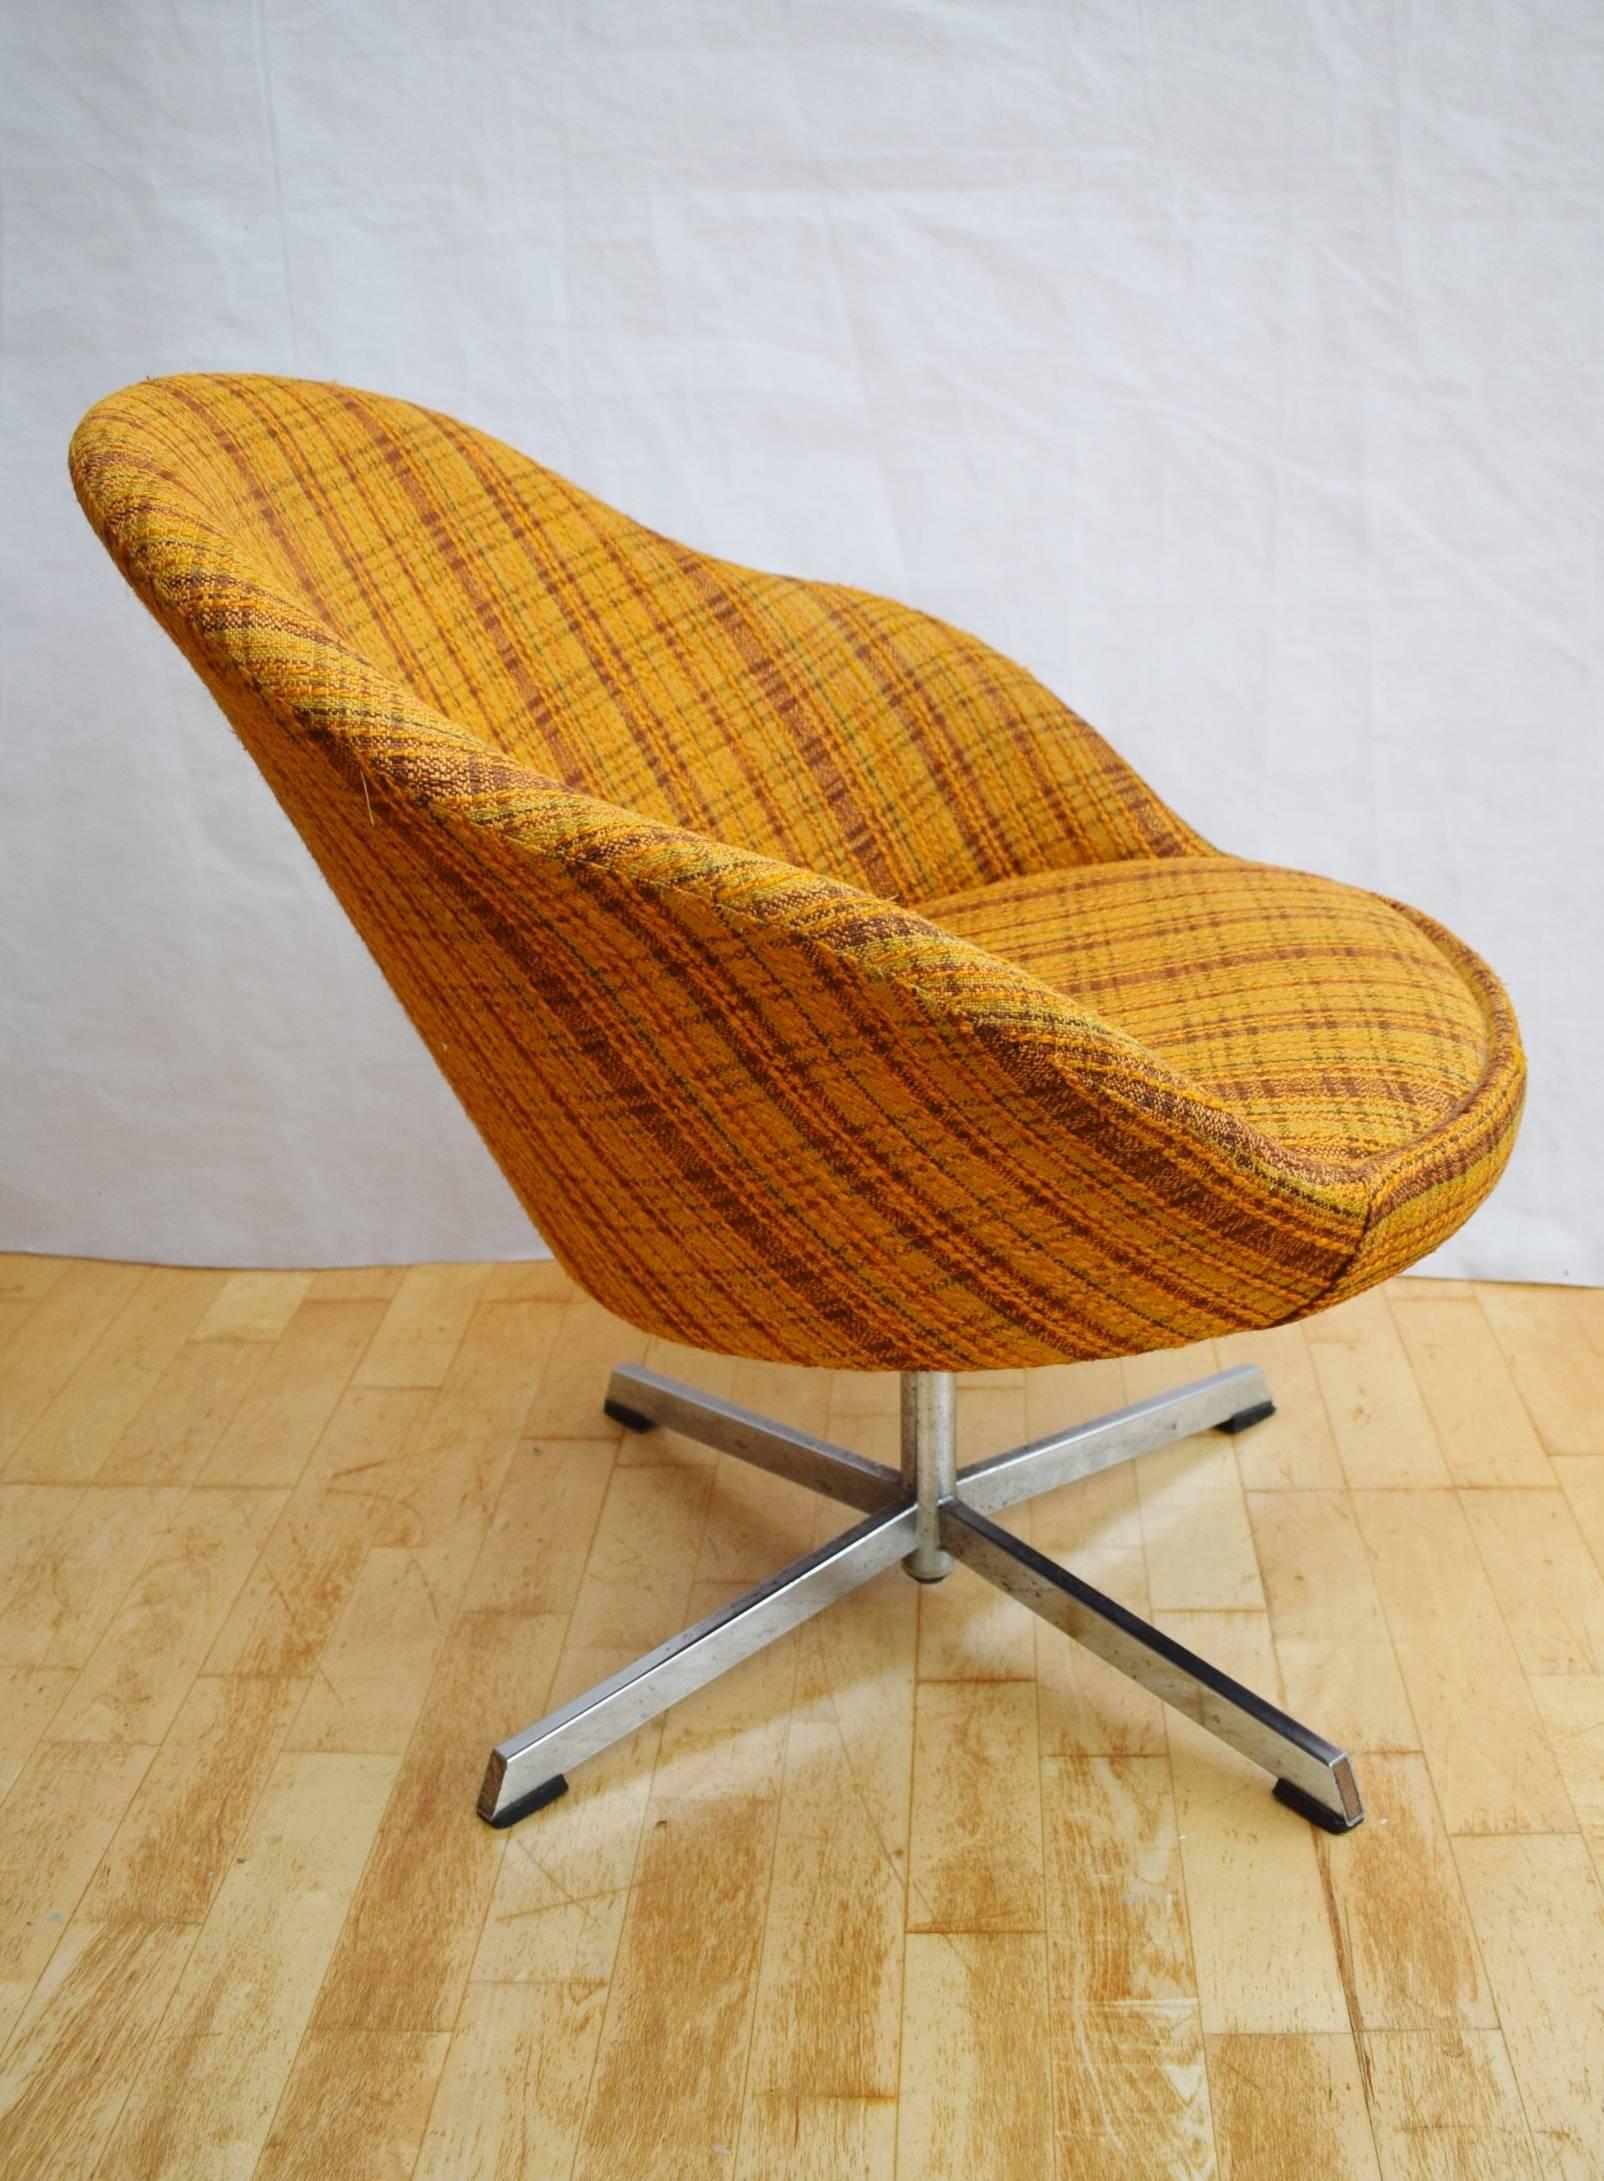 Designer: Danish design

Manufacturer: Unknown

Country: Denmark

Date: 1960s

Material: Chrome metal frame with swivel base and patterned wool upholstery

Maximum dimensions: Width 77cm, depth 70cm, height 69cm and seat height